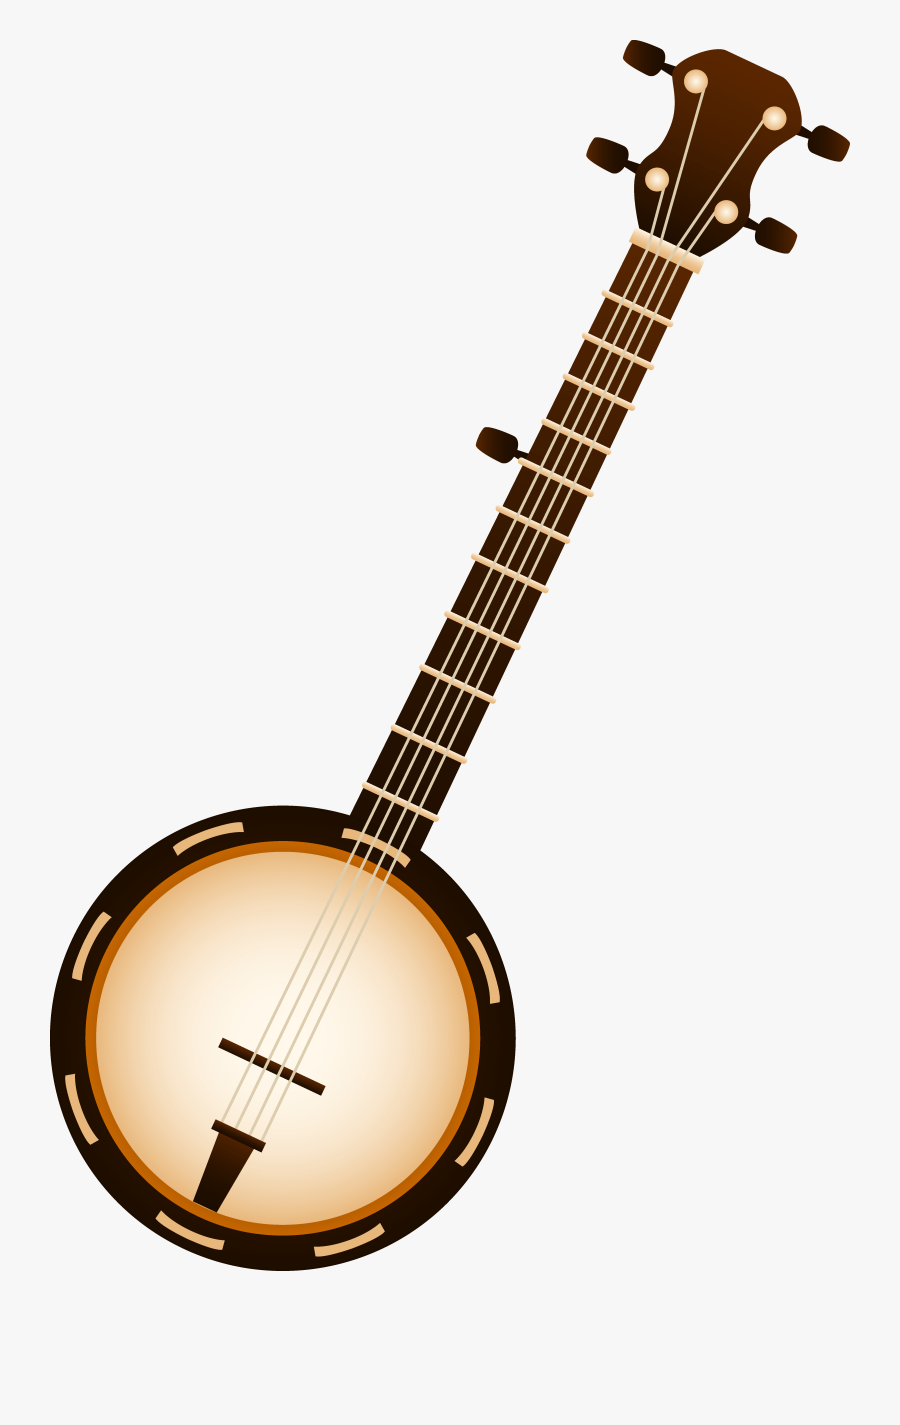 Free Clipart Folk Musicians - Banjo Country Music Instruments, Transparent Clipart